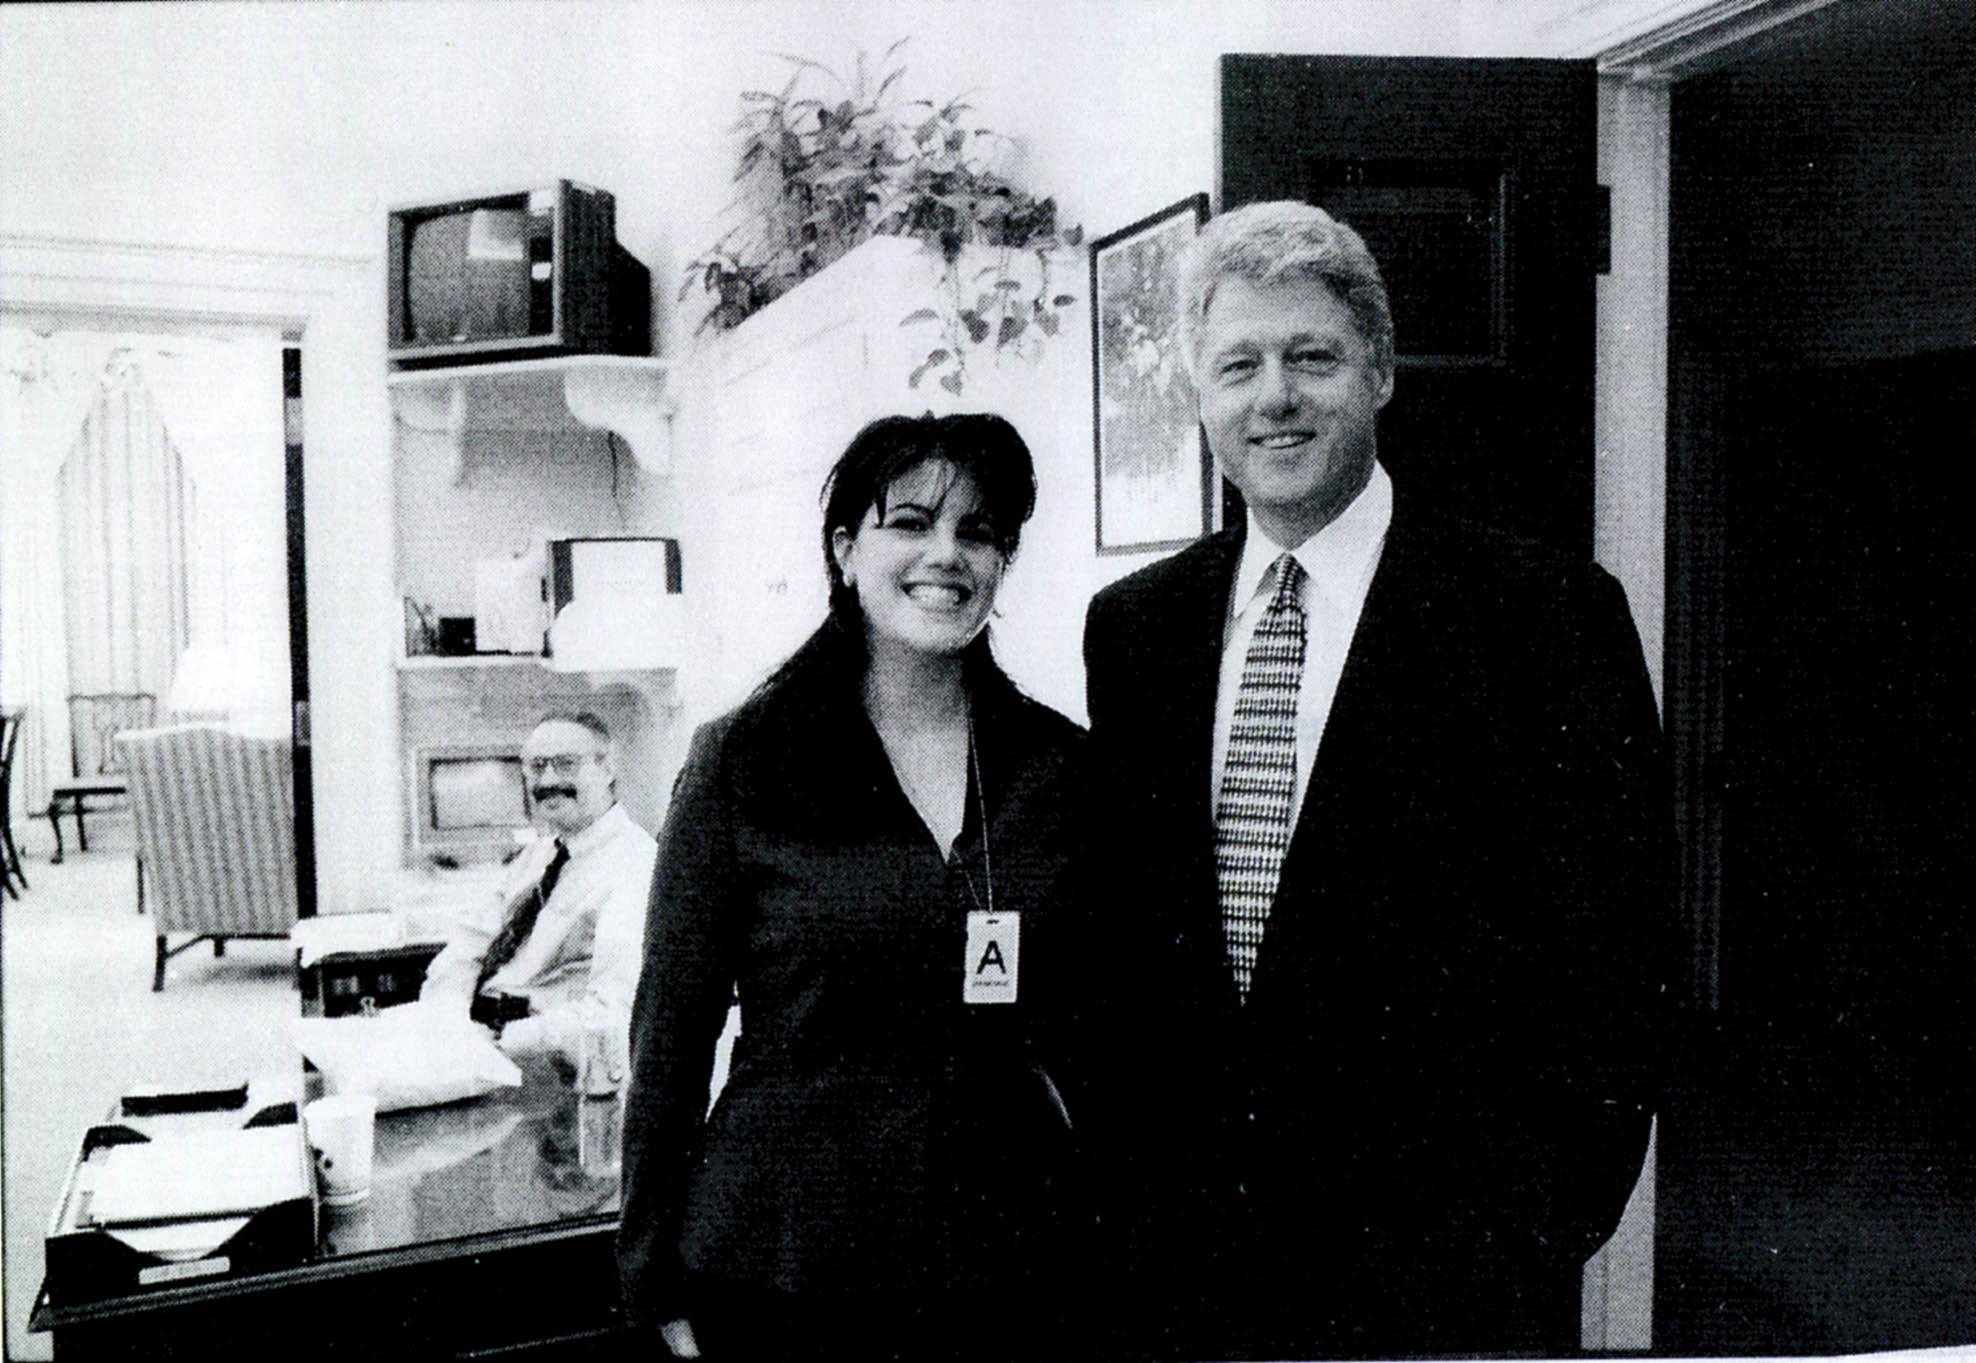 Black-and-white photo of Monica Lewinsky when she was an intern meeting President Bill Clinton at a White House function